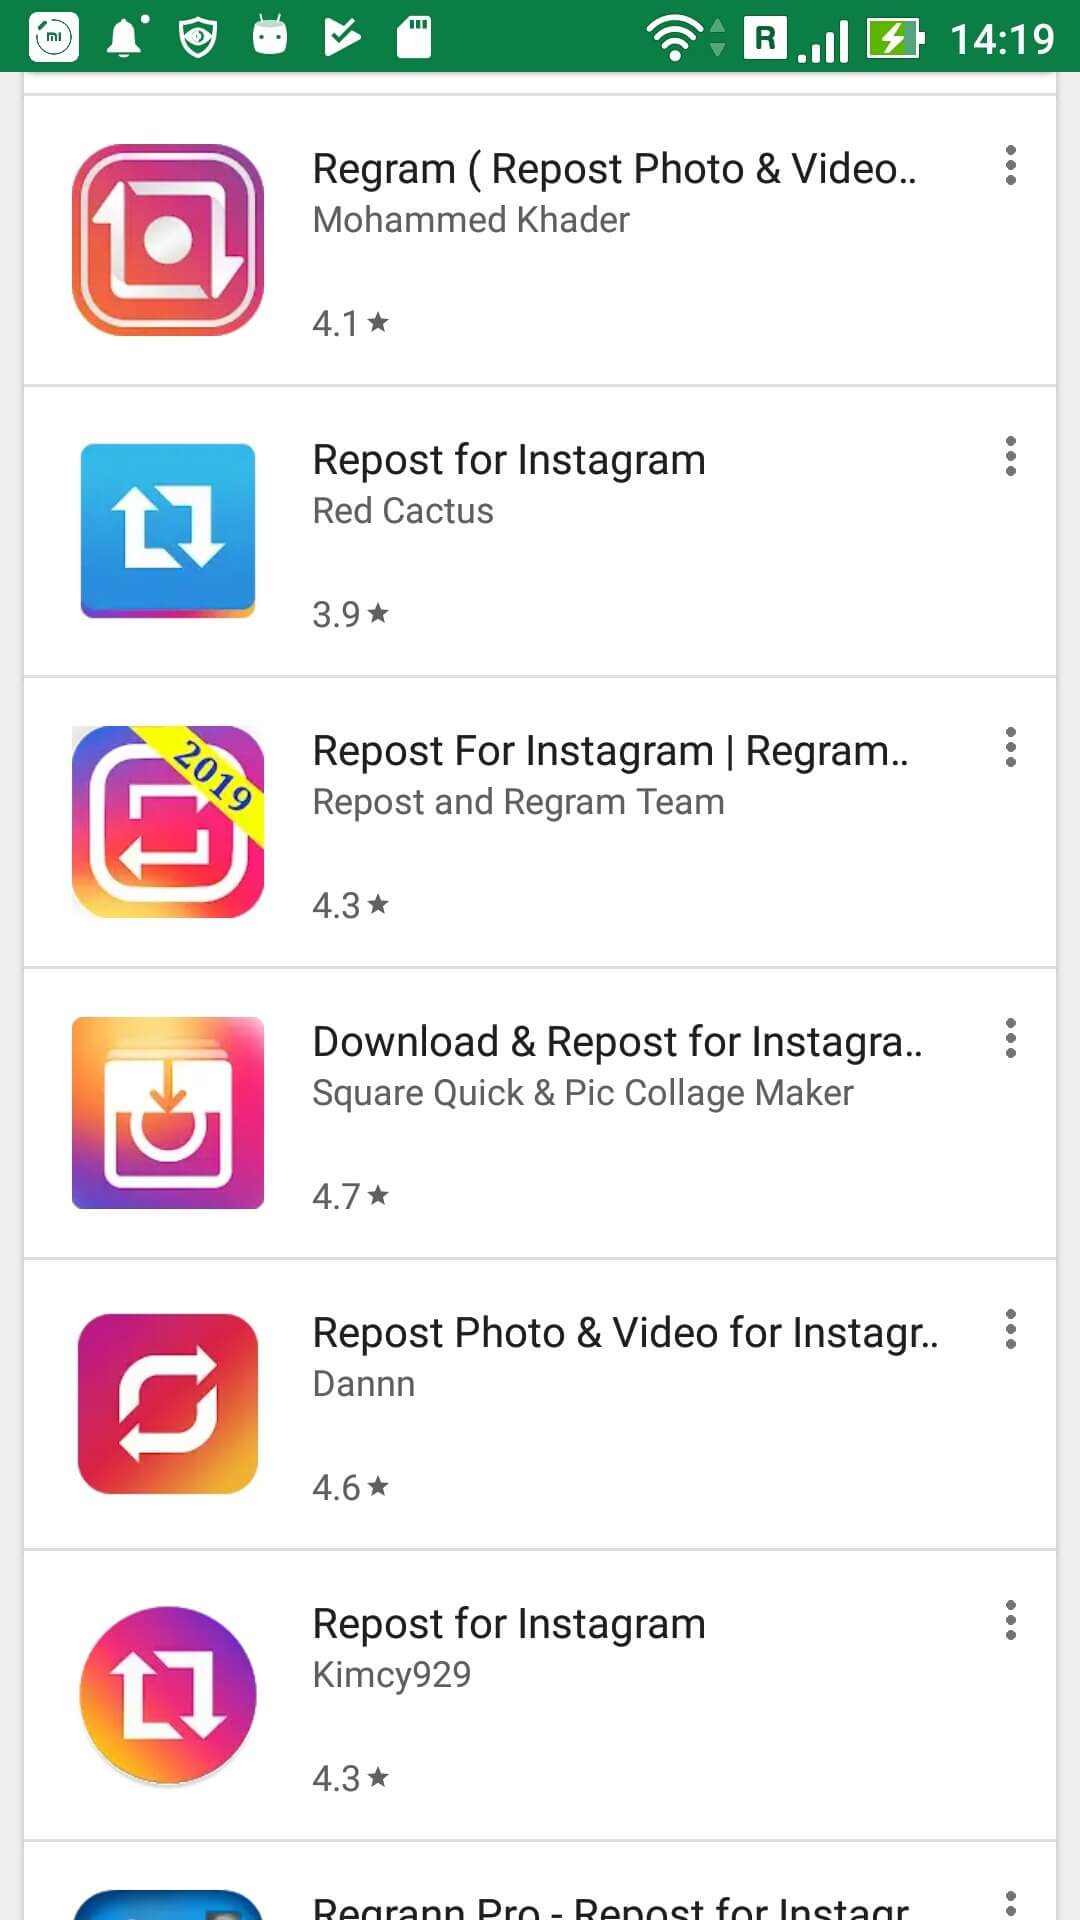 sample of third party regram apps for Instagram that are available in the Google Play store